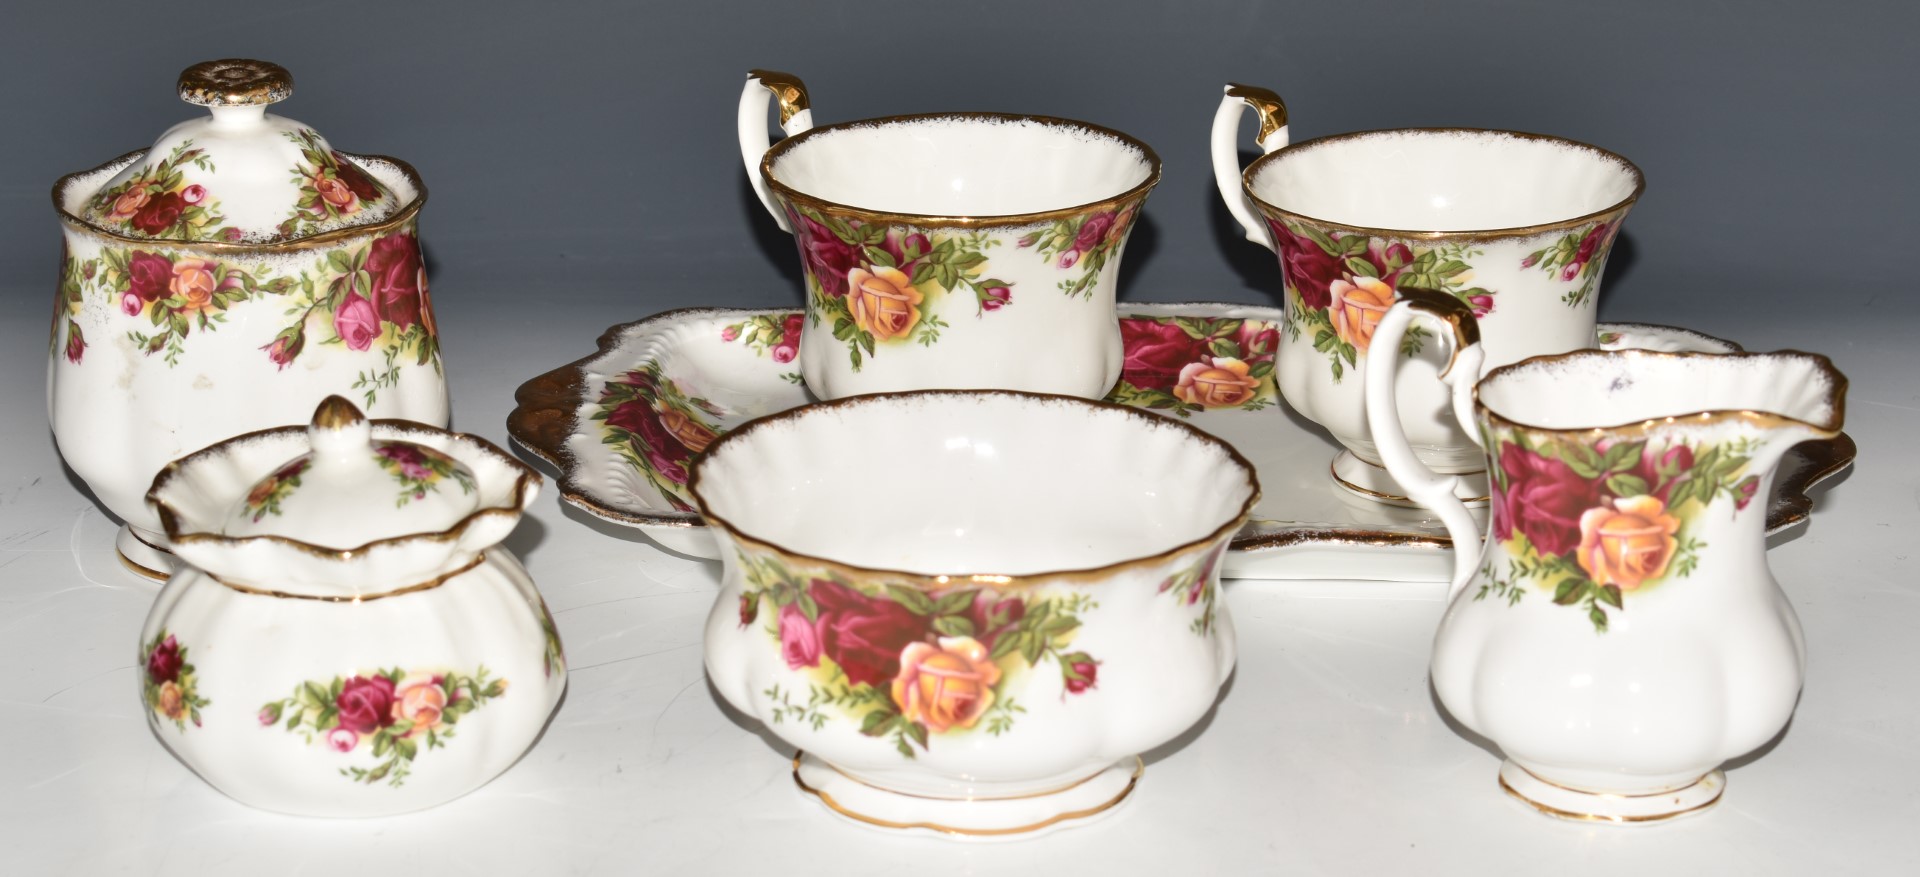 Approximately seventy pieces of Royal Albert Old Country Roses dinner and teaware, tallest 26cm - Image 4 of 5